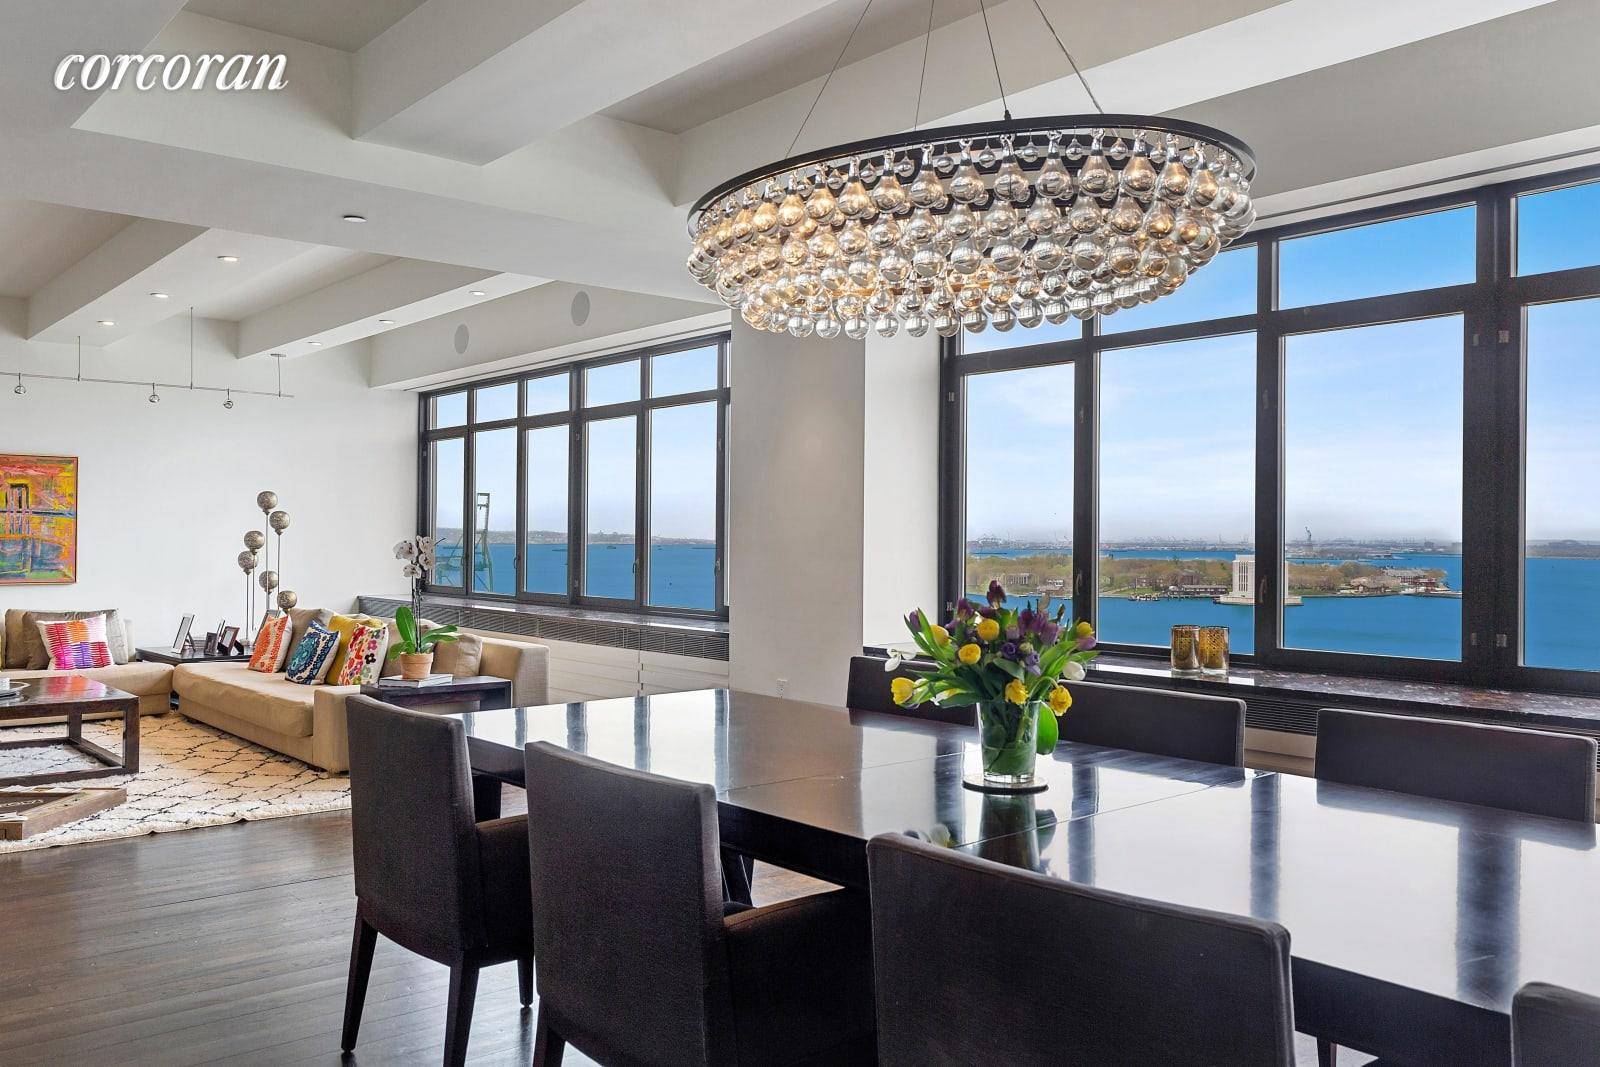 PARADISE PLUS PARKING INCLUDED describes this incredibly beautiful, over 5, 000 SF luxury home overlooking the East River, Manhattan skyline, the Statue of Liberty, the Brooklyn skyline AND Brooklyn Bridge ...